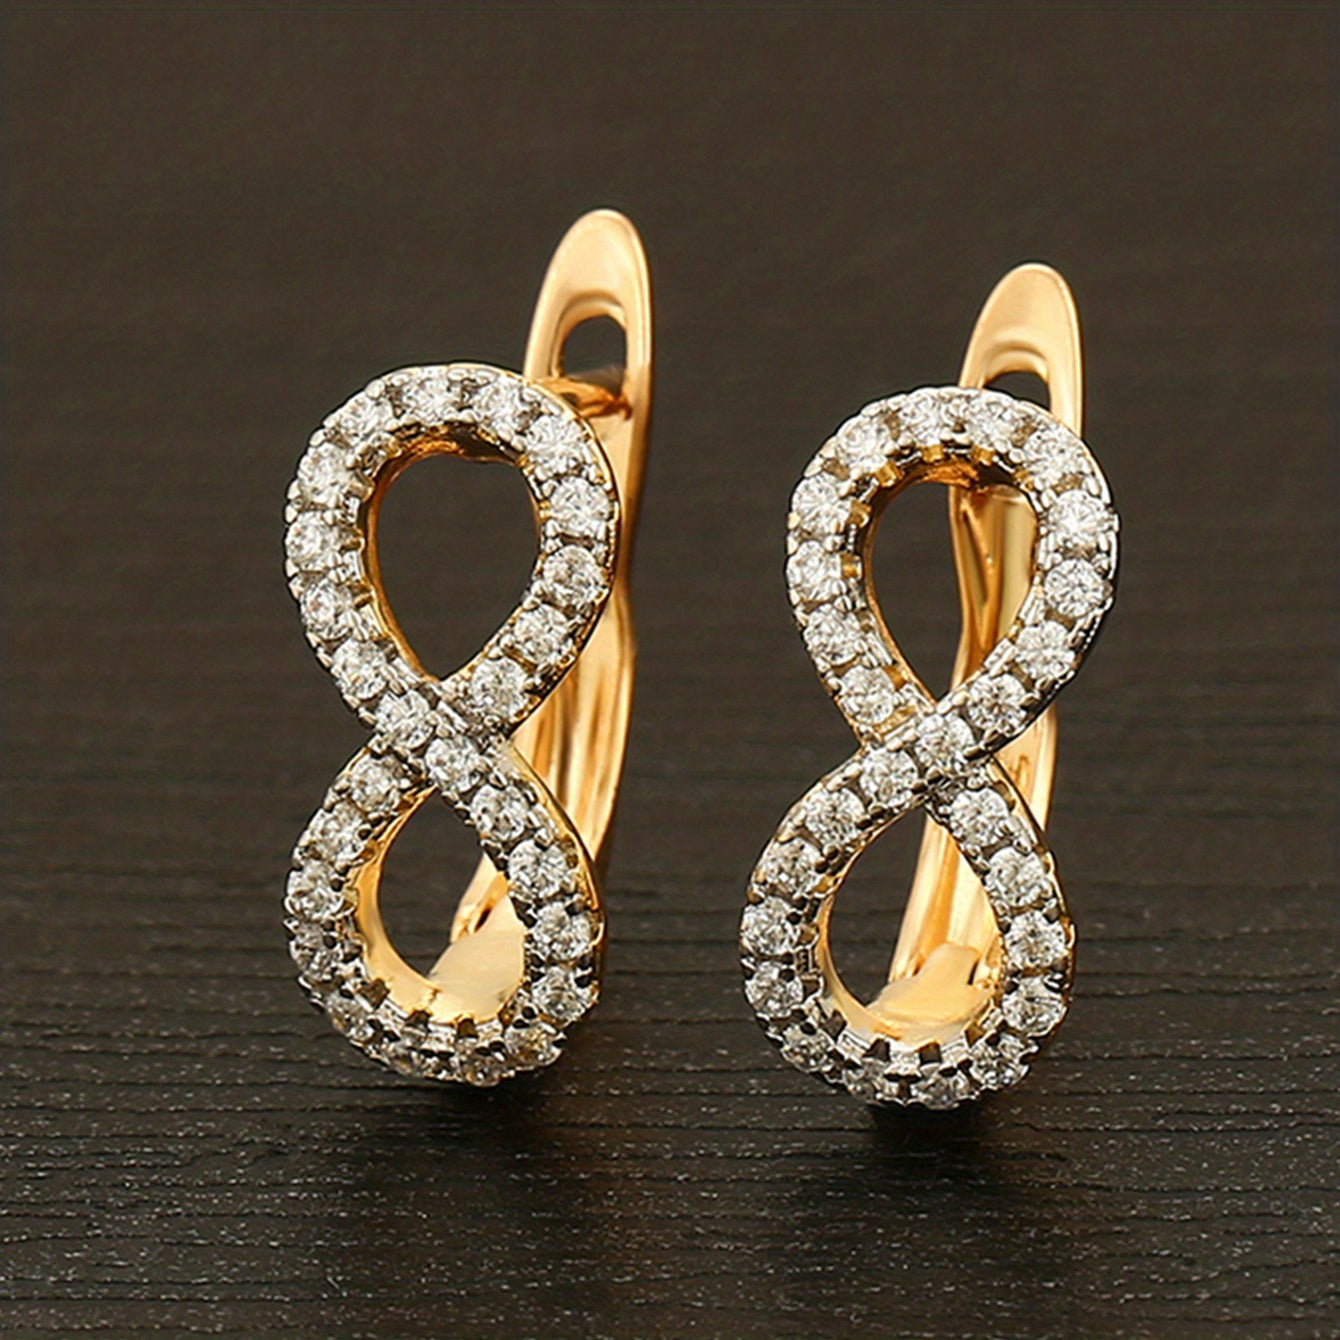 Gorgeous 18K Gold Plated Bohemian Hoop Earrings with Shiny Zircon Decor - Perfect for Everyday Wear!